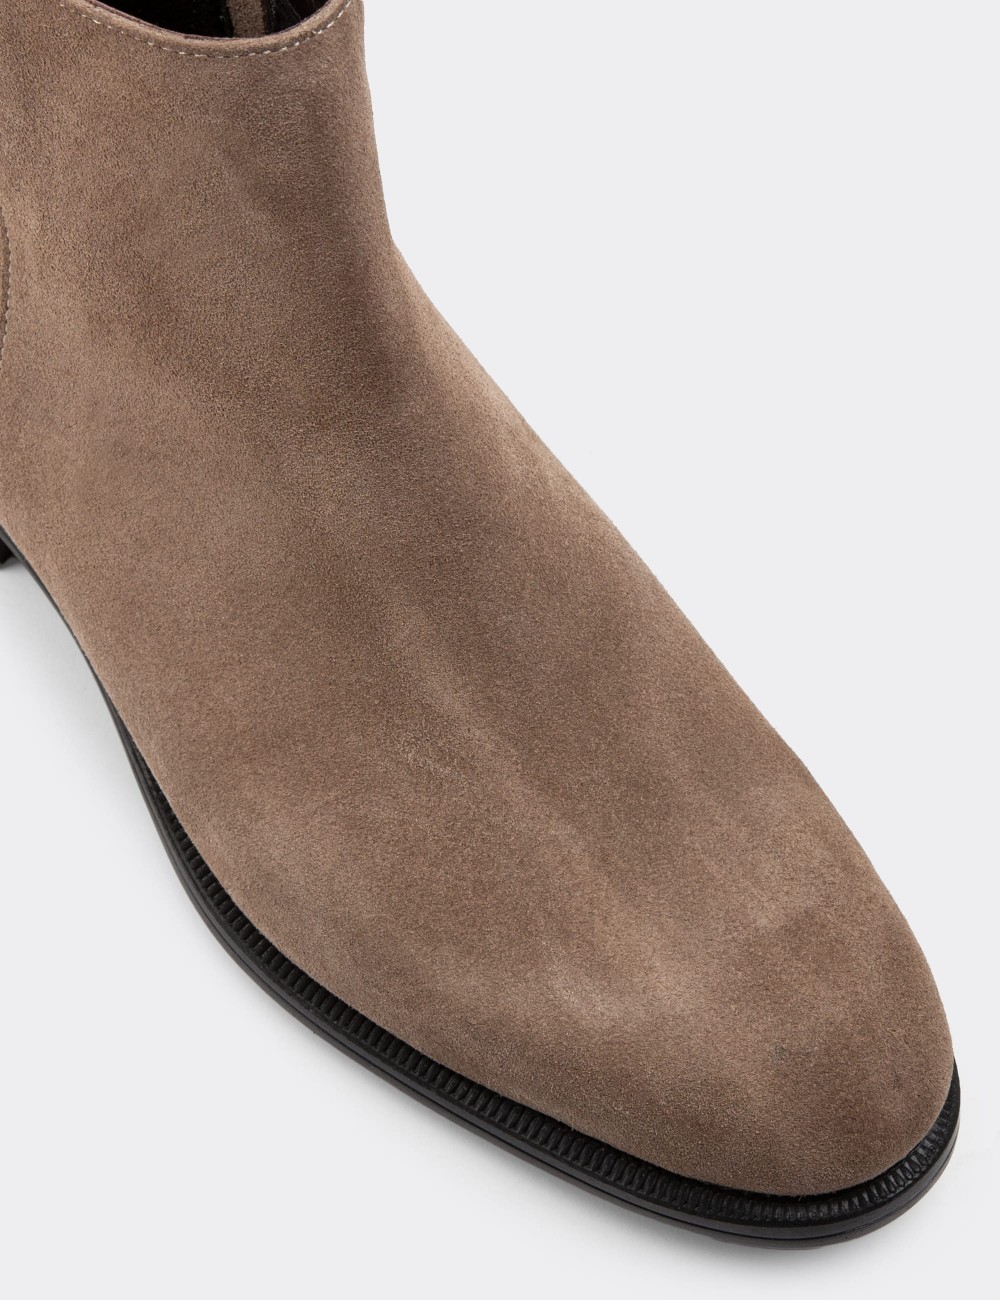 Sandstone Suede Leather Boots - 01921MVZNC01